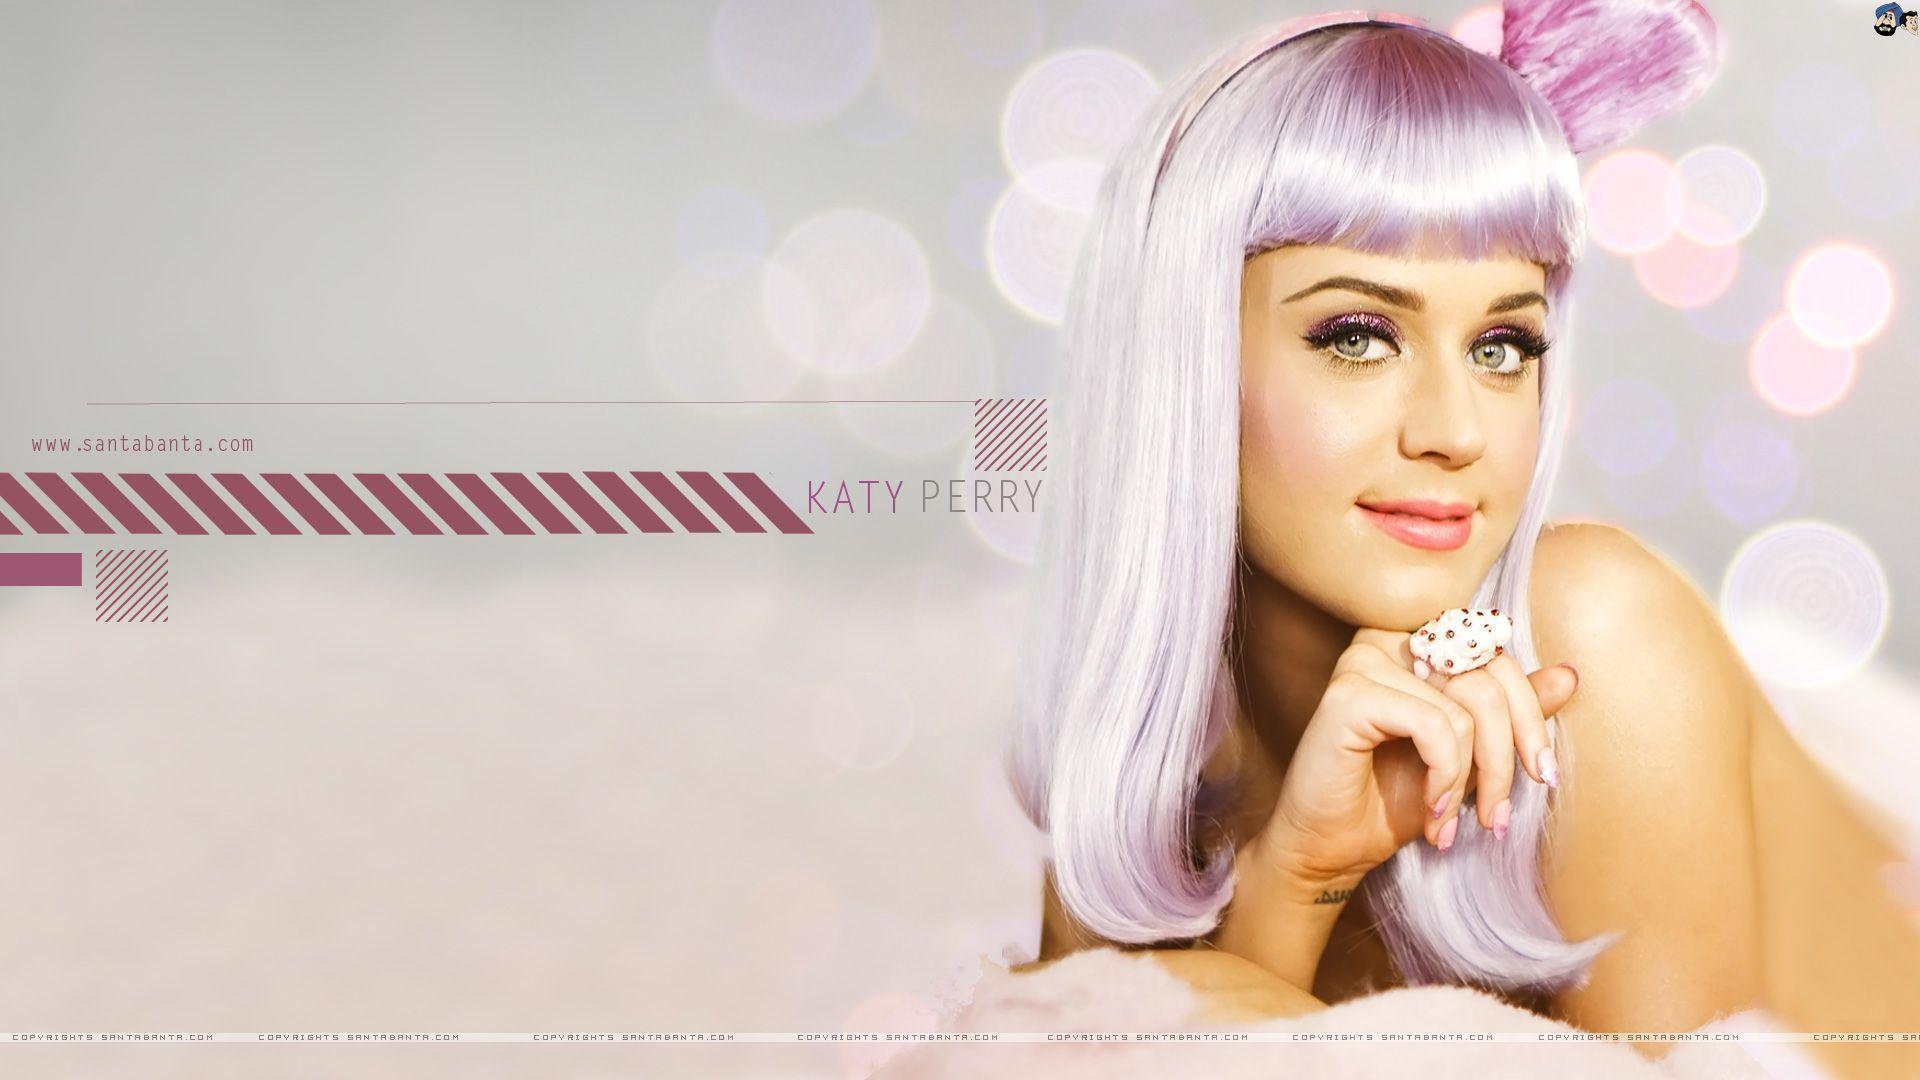 Katy Perry36 Katy Perry Wallpaper HD Free Wallpaper Background